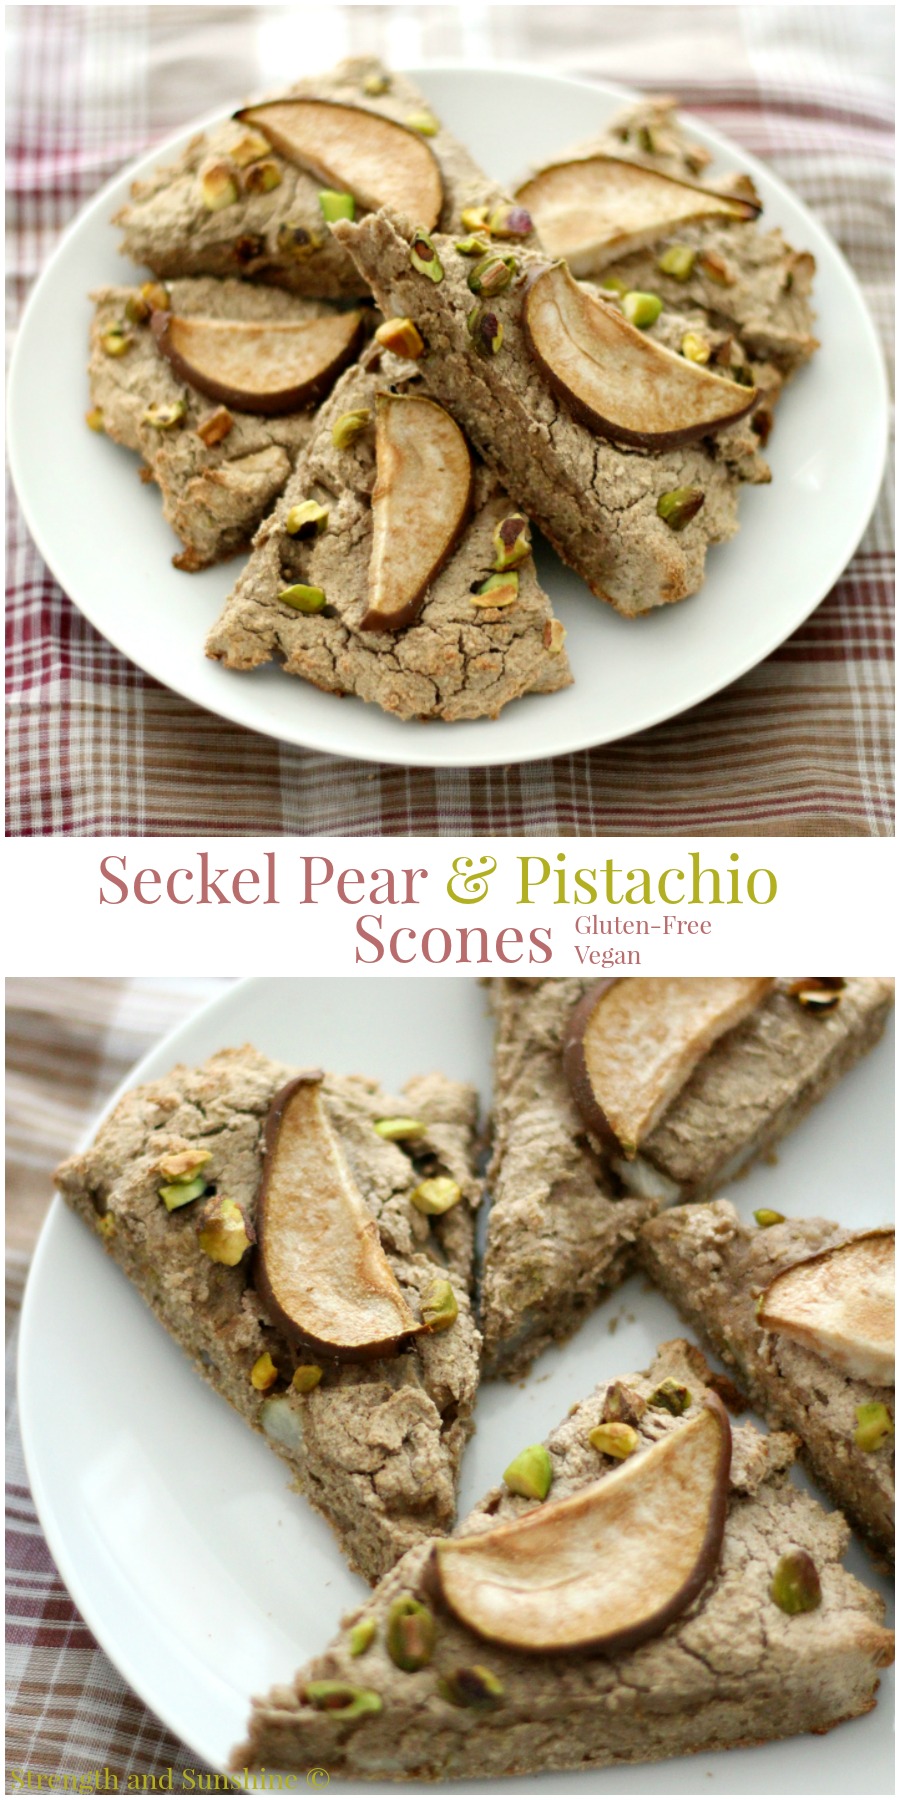 Seckel Pear & Pistachios Scones | Strength and Sunshine @RebeccaGF666 Lovely whole grain gluten-free vegan scones for an elegant winter breakfast or brunch. Seckel pear & pistachio scones are perfect paired with a warm mug of coffee or tea.